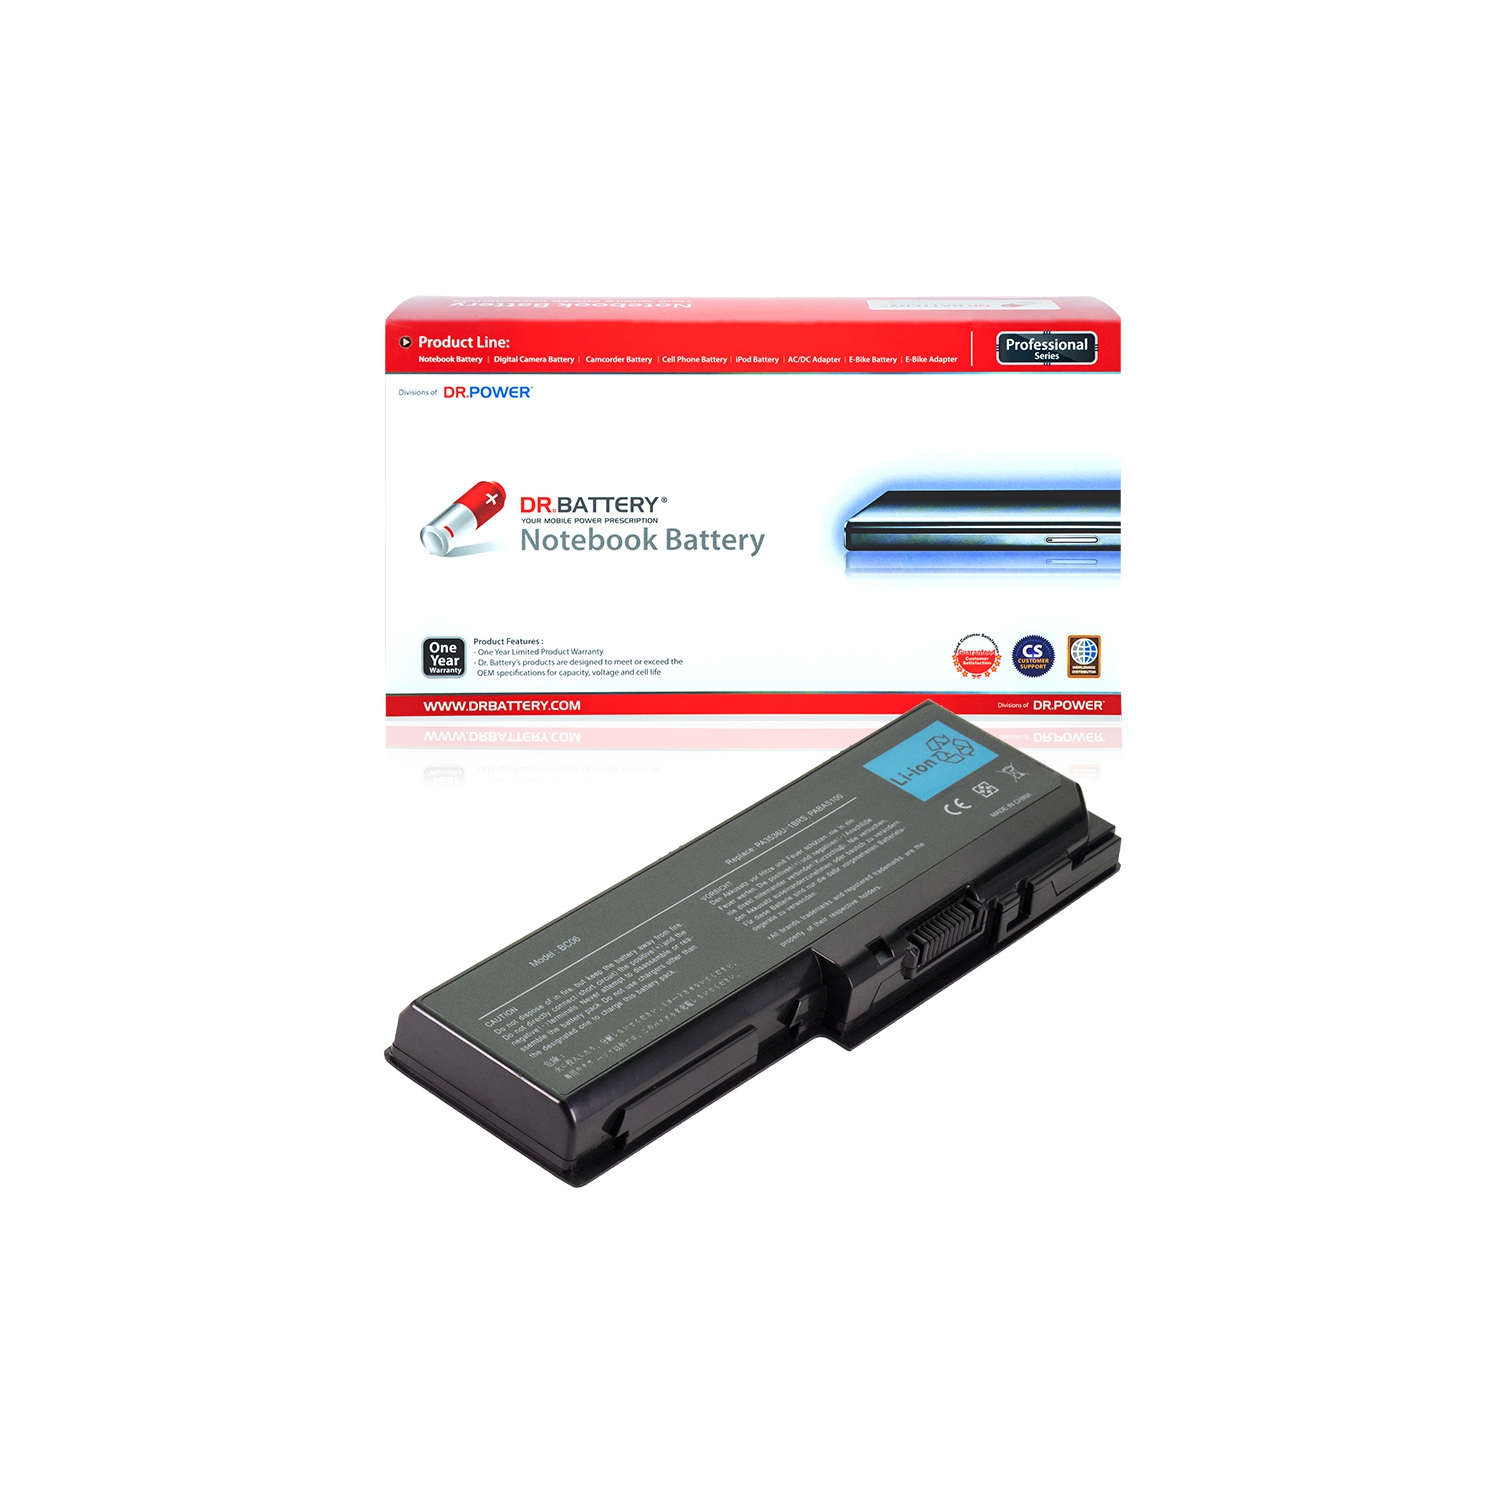 DR. BATTERY Replacement for Toshiba Satellite P200D P205 P205D P300 PA3536U-1BRS PA3537U-1BAS PA3537U-1BRS [10.8V / 48Wh] **Free Shipping**